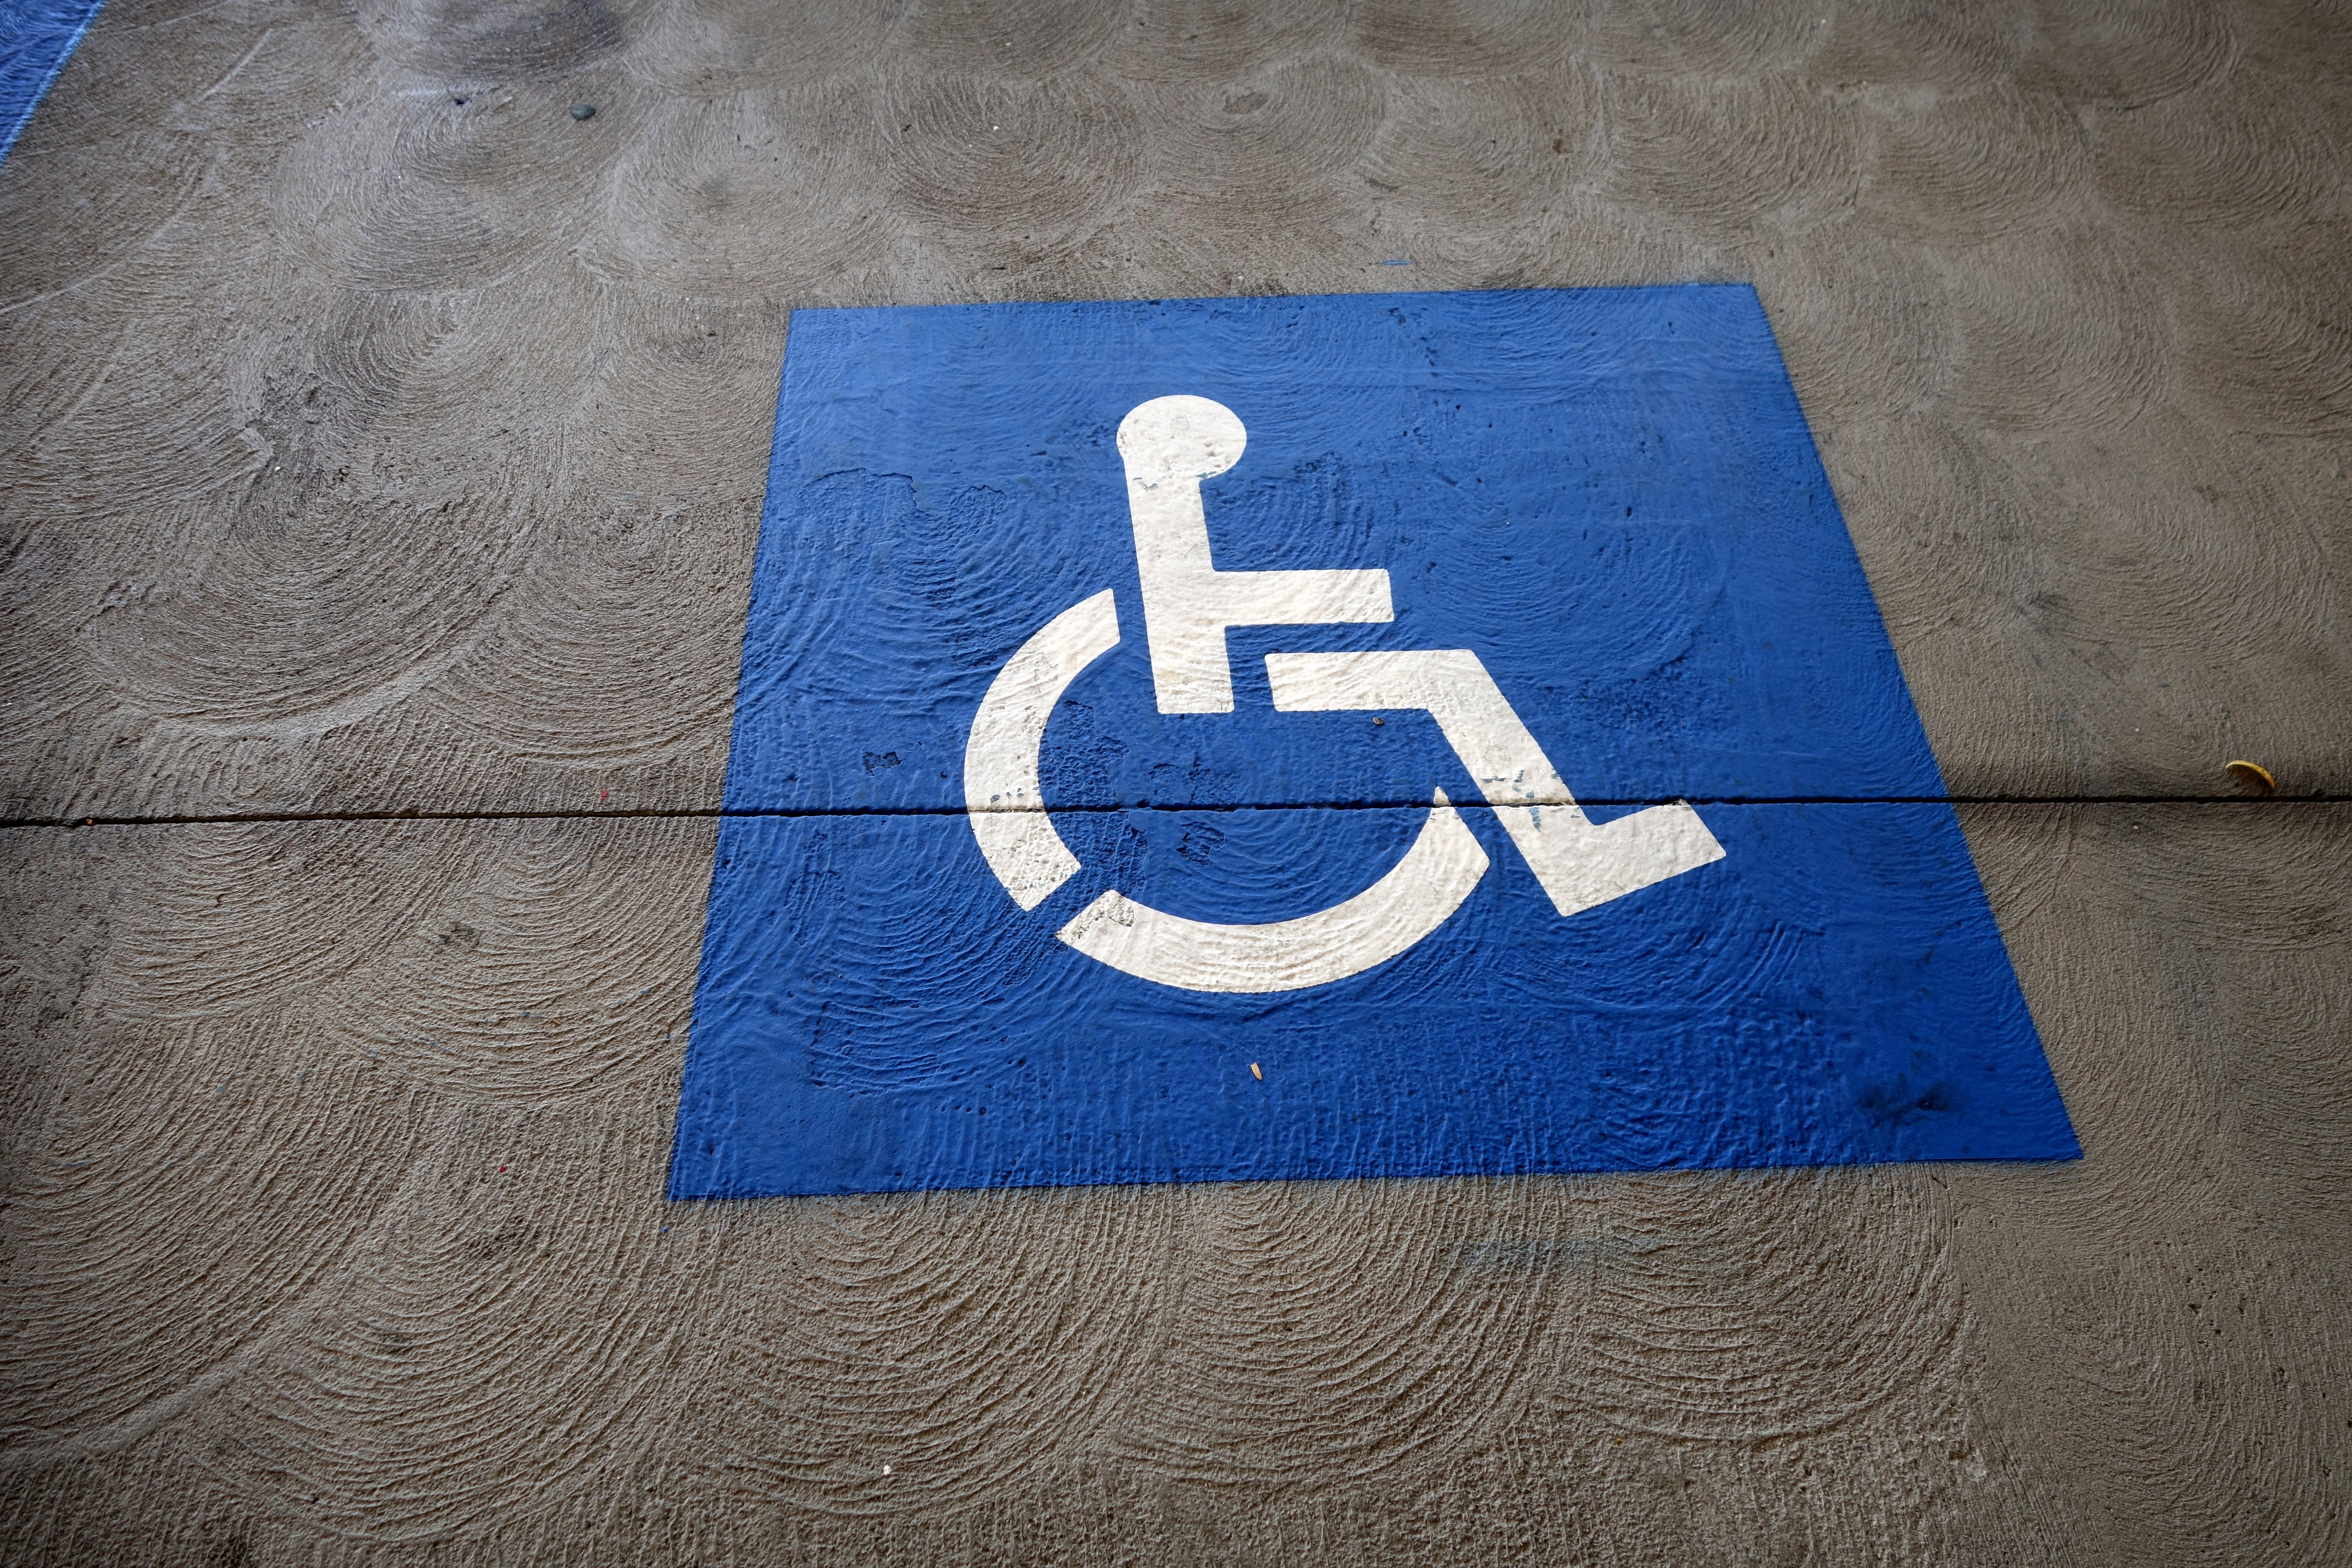 parking space dimensions - handicap stall